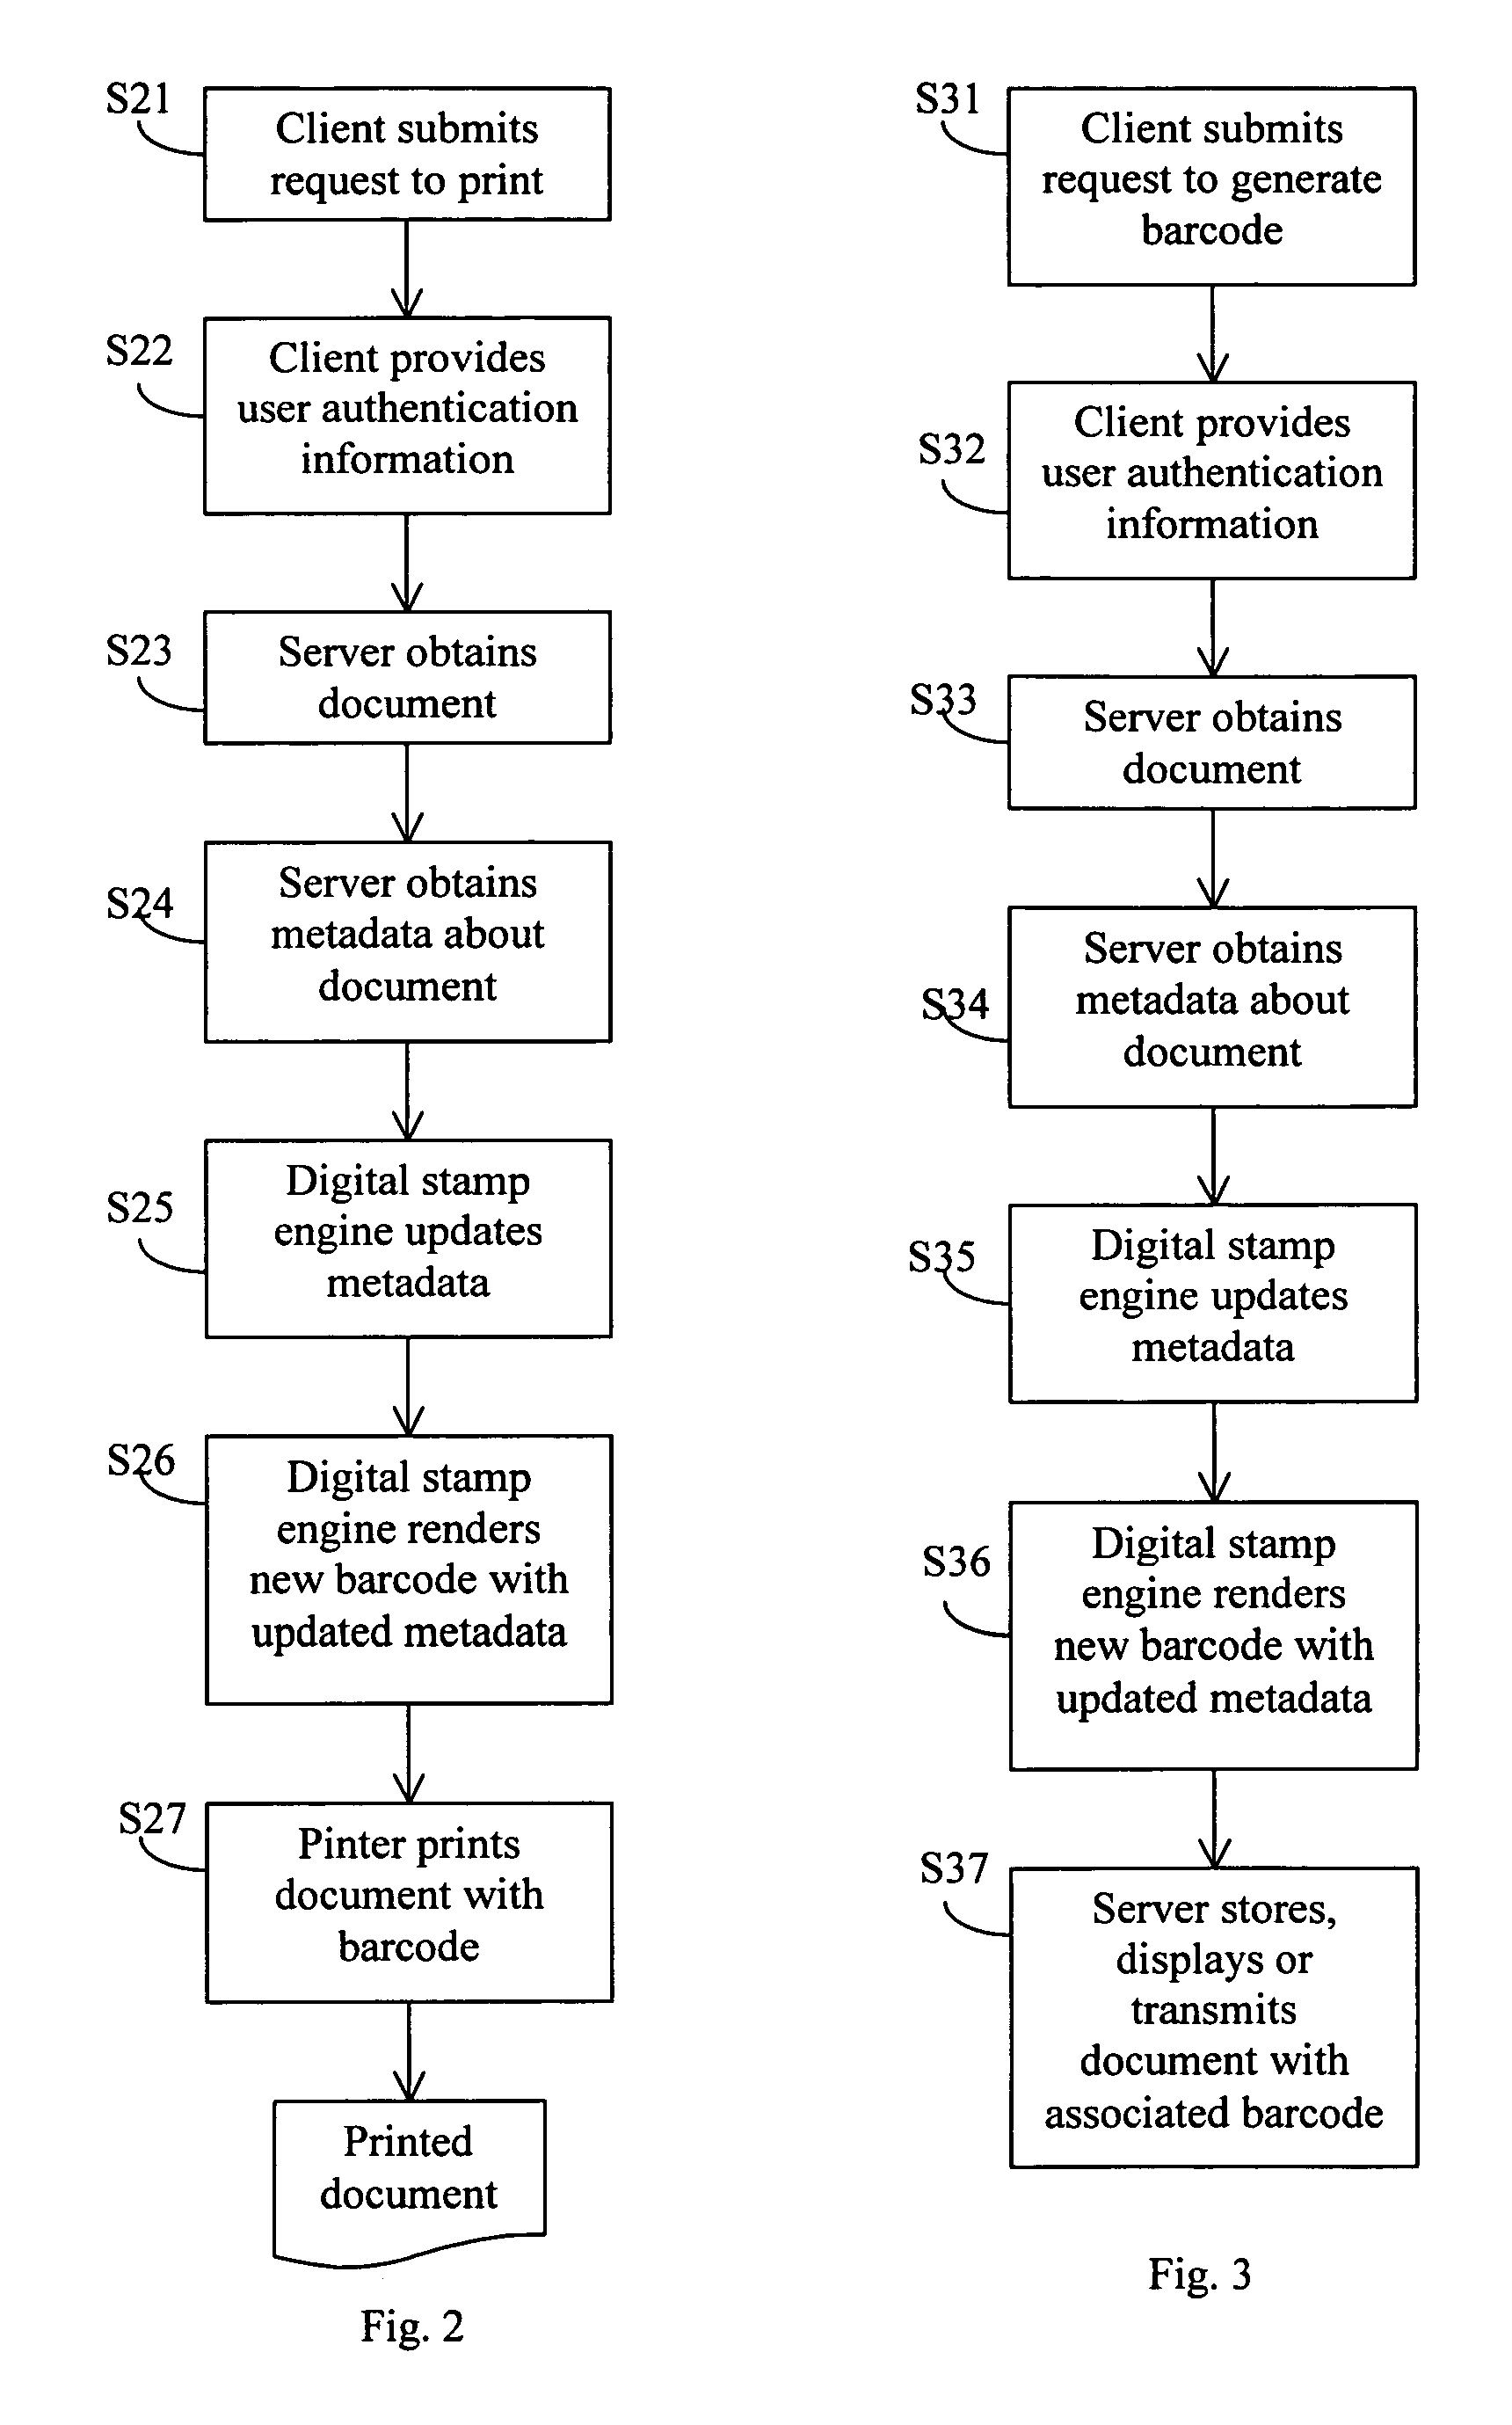 Document management method using barcode to store access history information